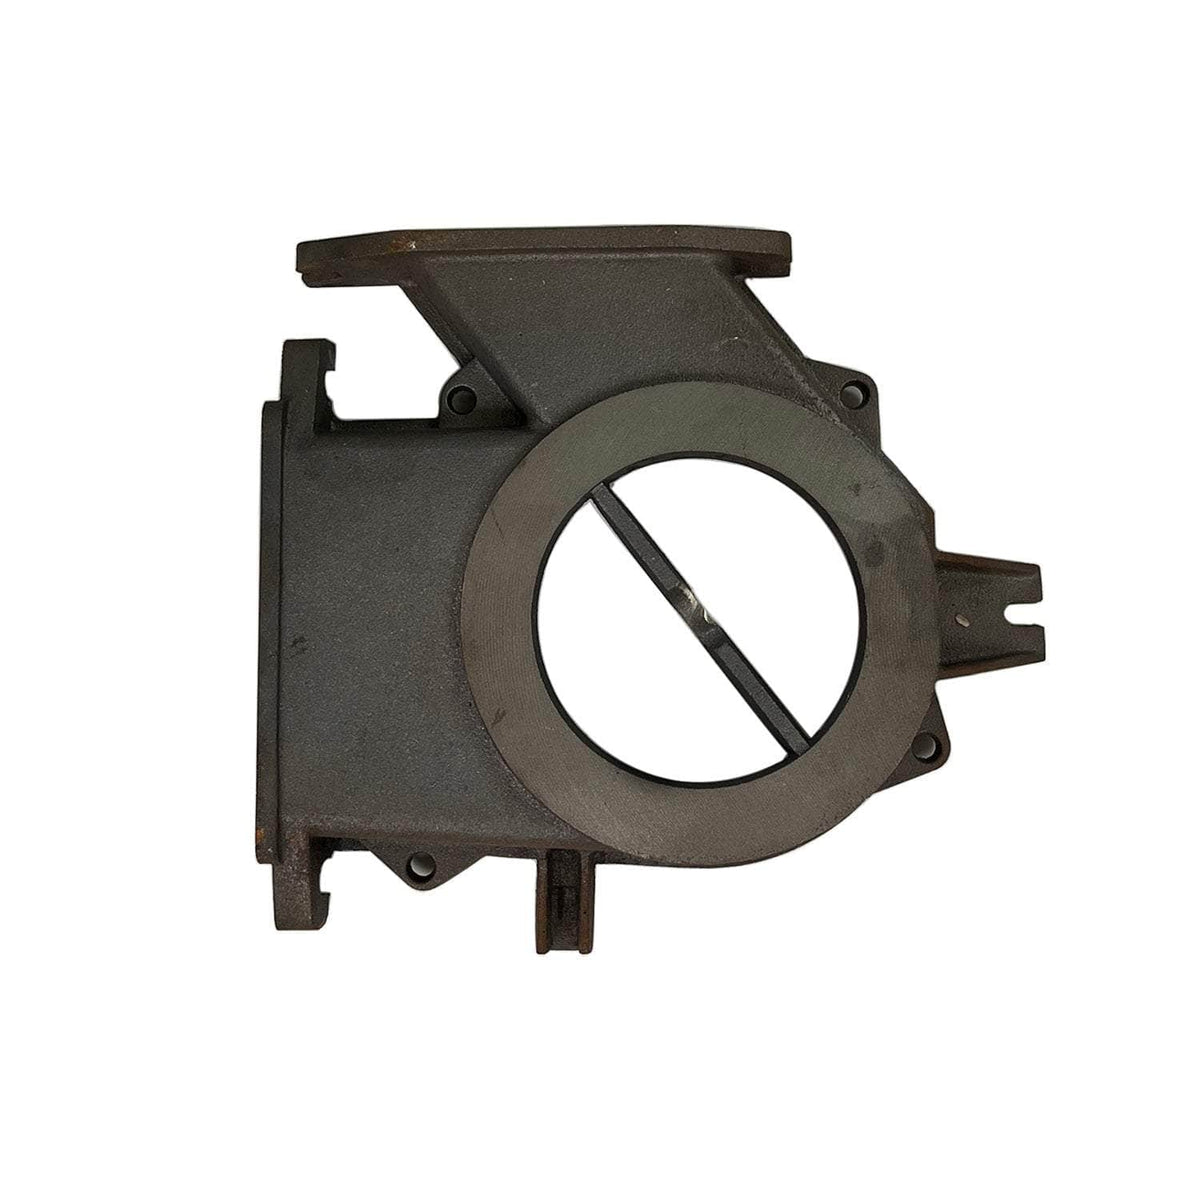 Top of Oven Casting for Pre-1974 Aga range cookers (top oven)